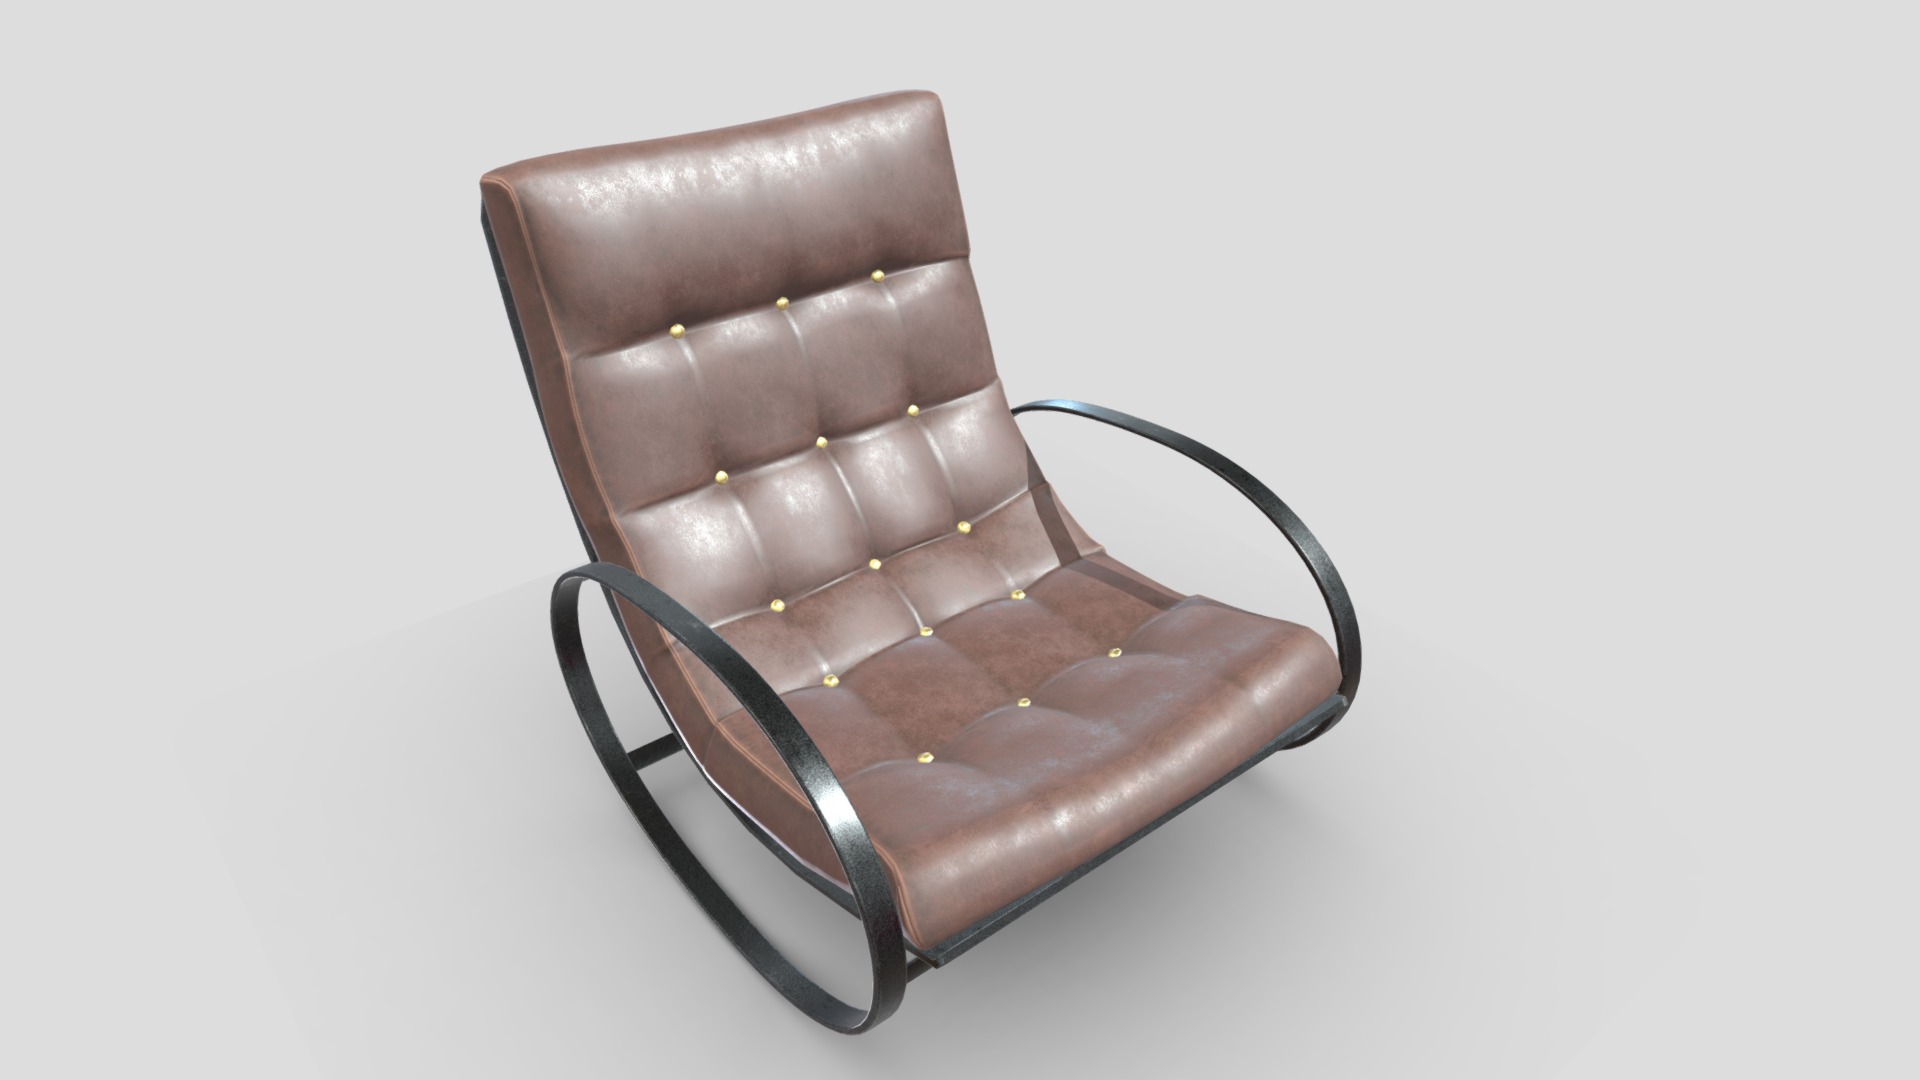 3D model Arm Chair 16 - This is a 3D model of the Arm Chair 16. The 3D model is about a brown leather chair.